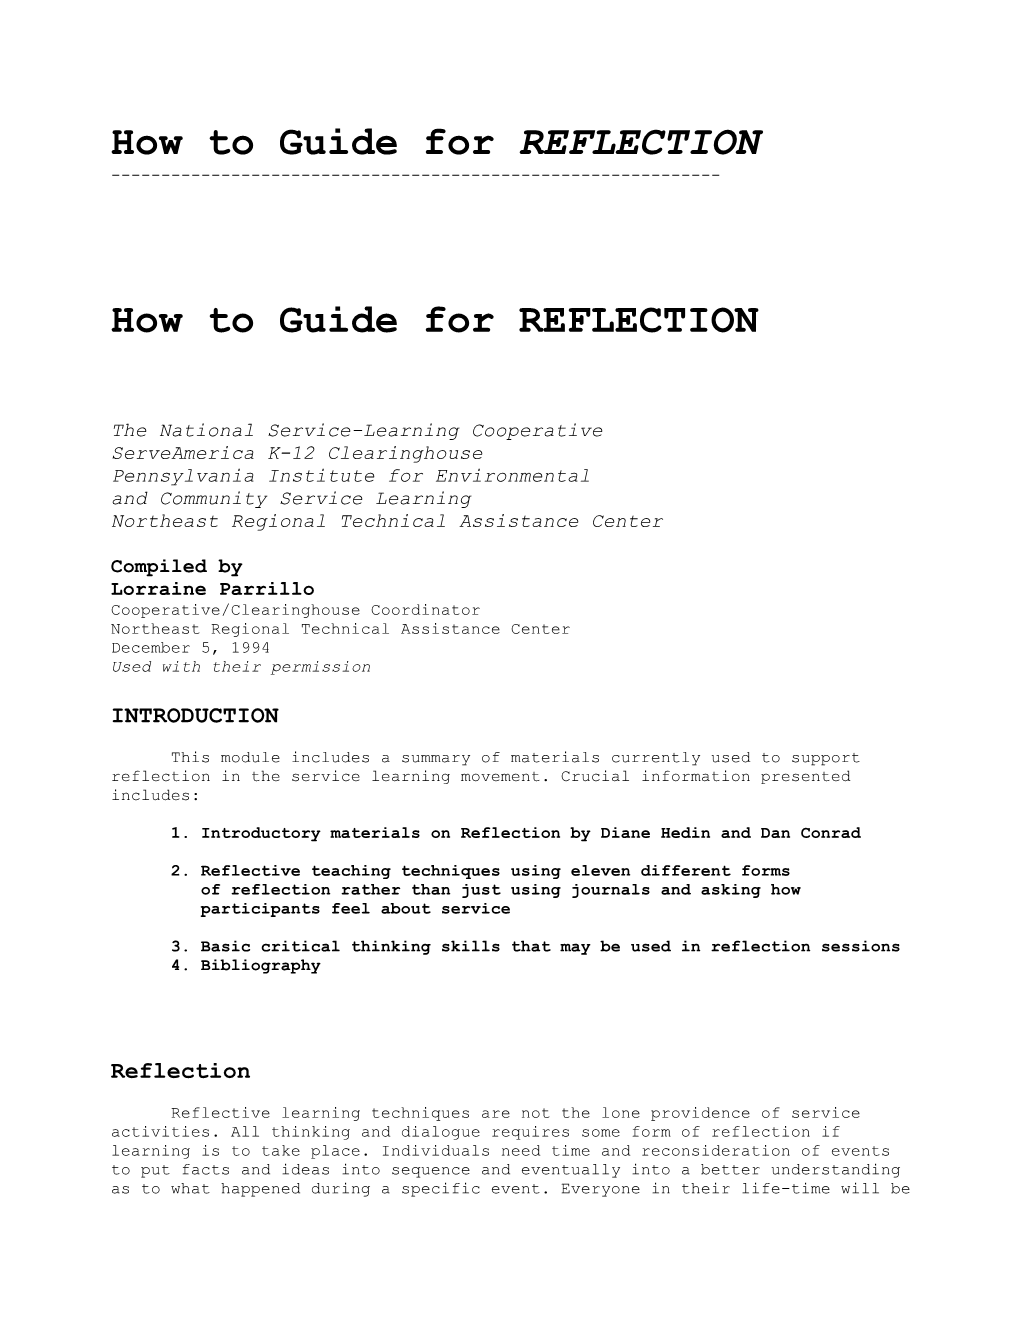 How to Guide For: REFLECTION